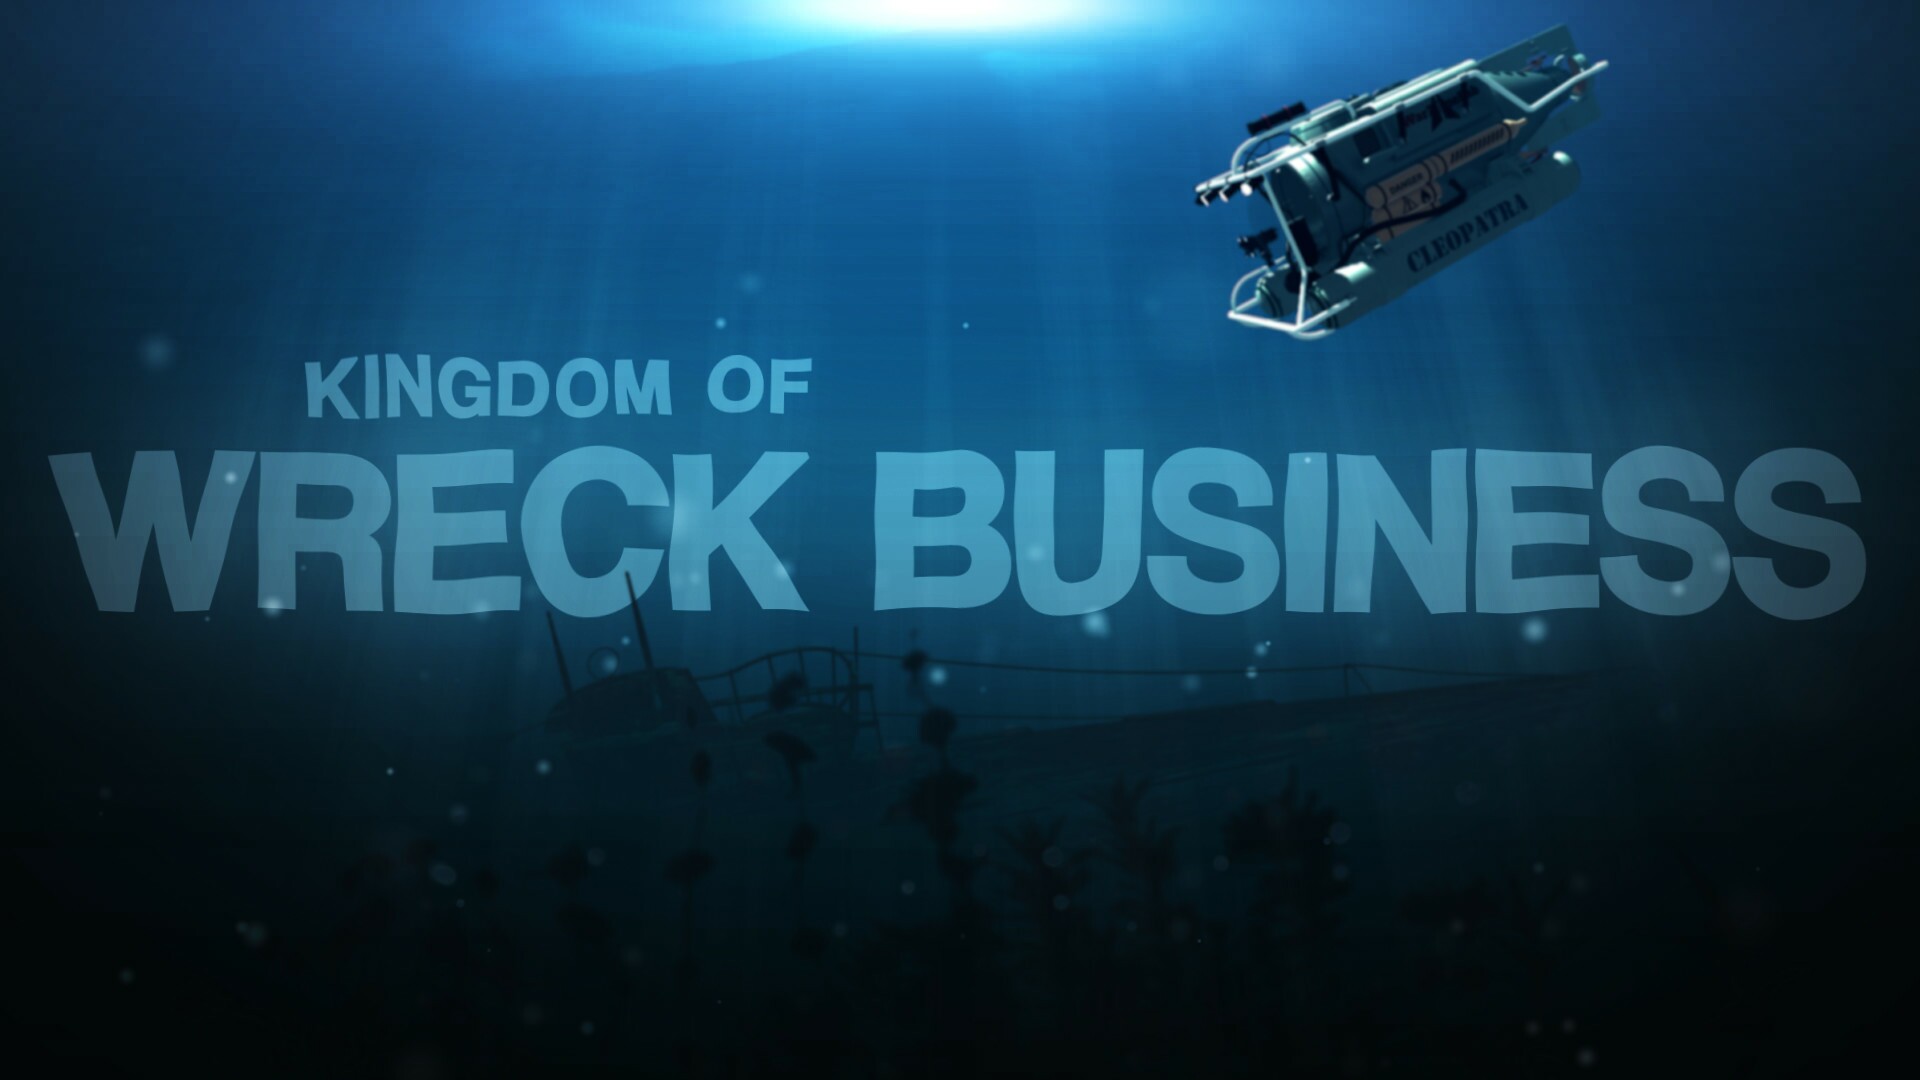 Kingdom of Wreck Business